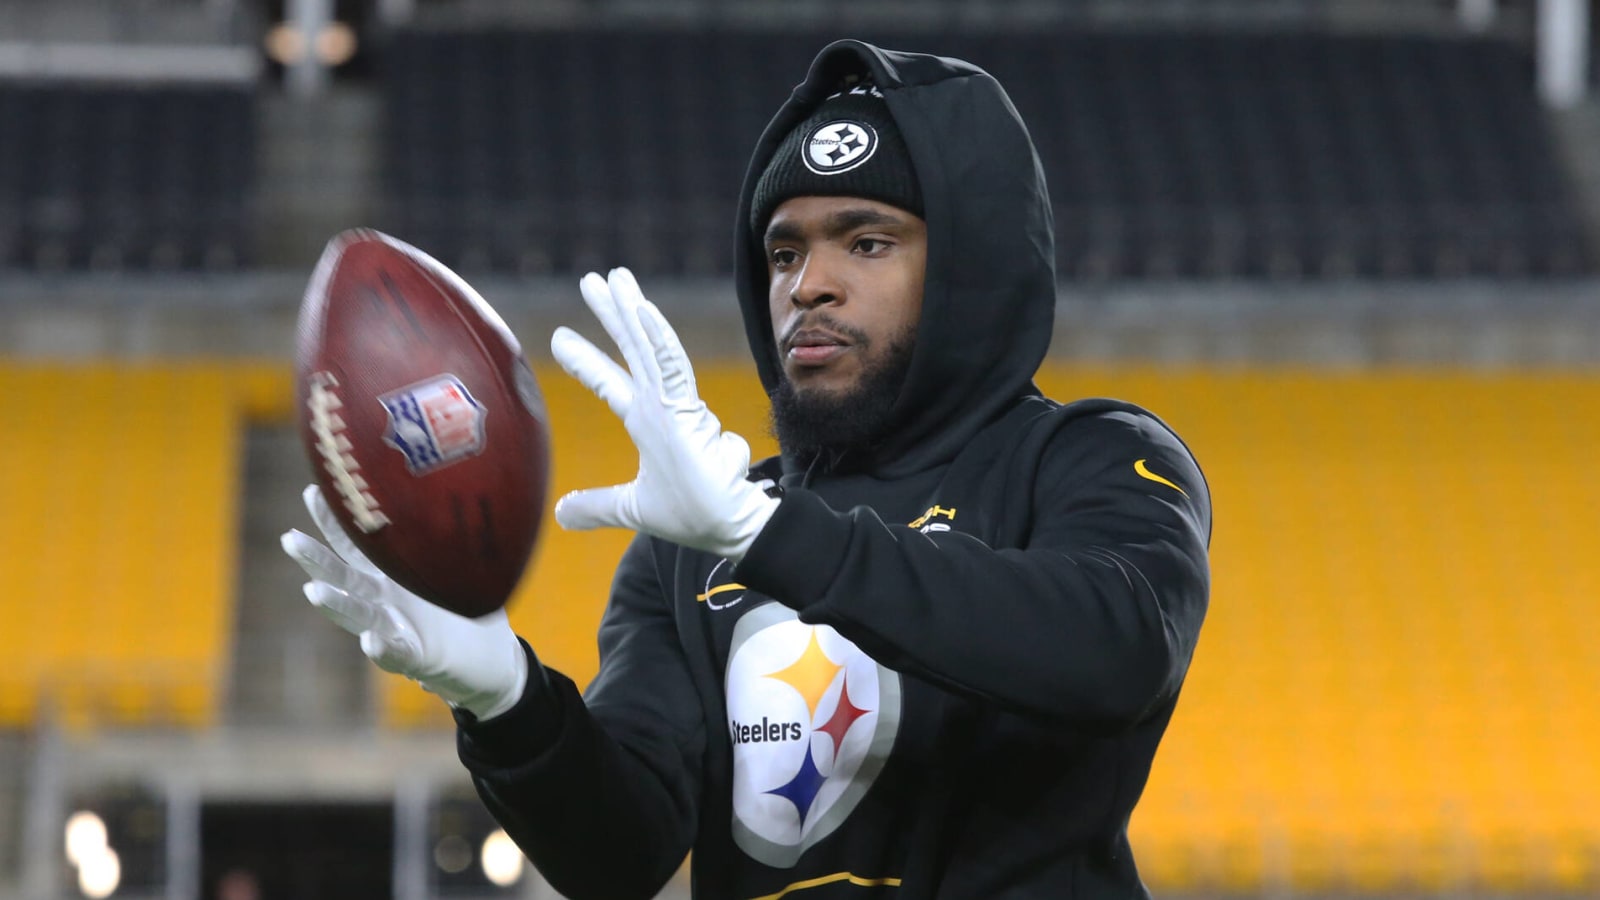 McLaurin deal doesn't mean Steelers will pay Johnson?